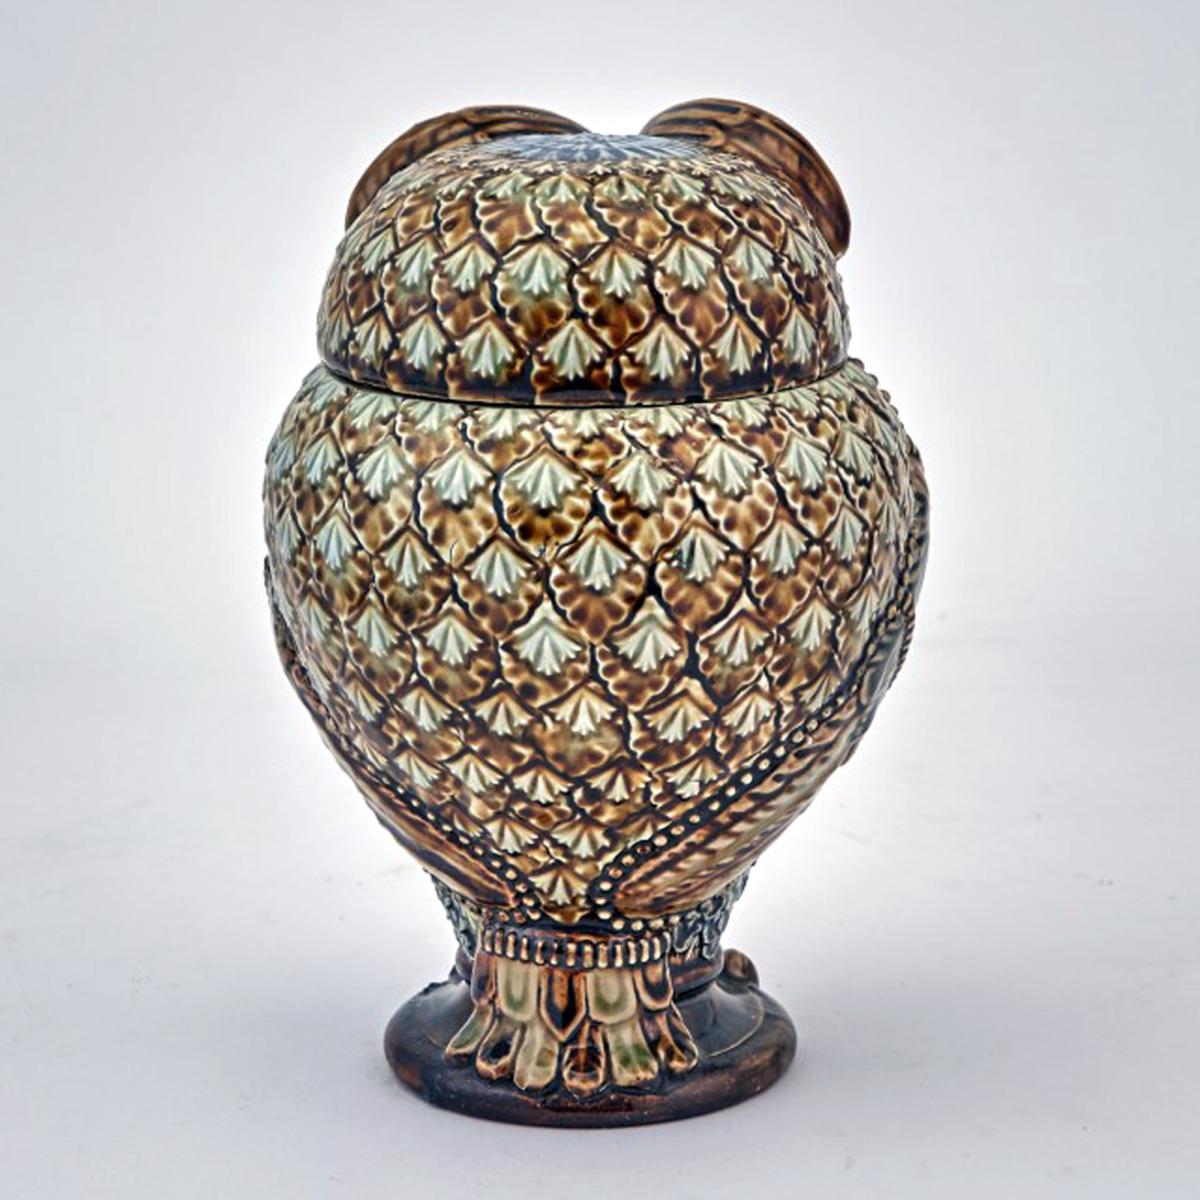 Doulton Stoneware Jar and Cover in form of an Owl, Marked for Mark  V. Marshall, Dated 1883.